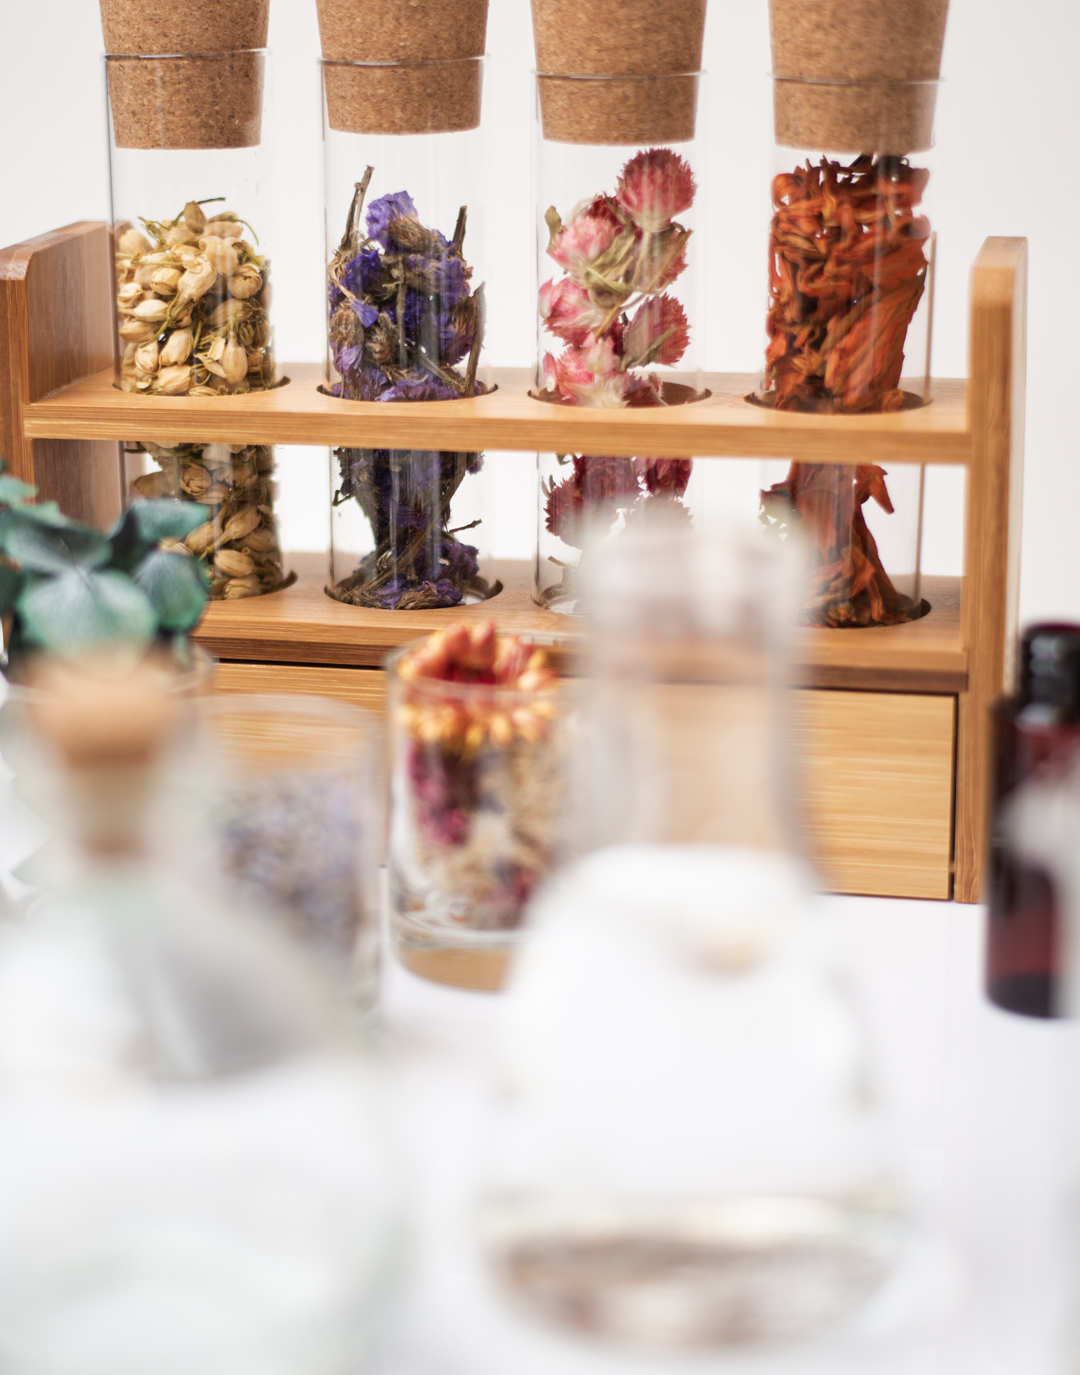 Test tubes with cork stoppers are filled with dried flowers and other fragrance ingredients.